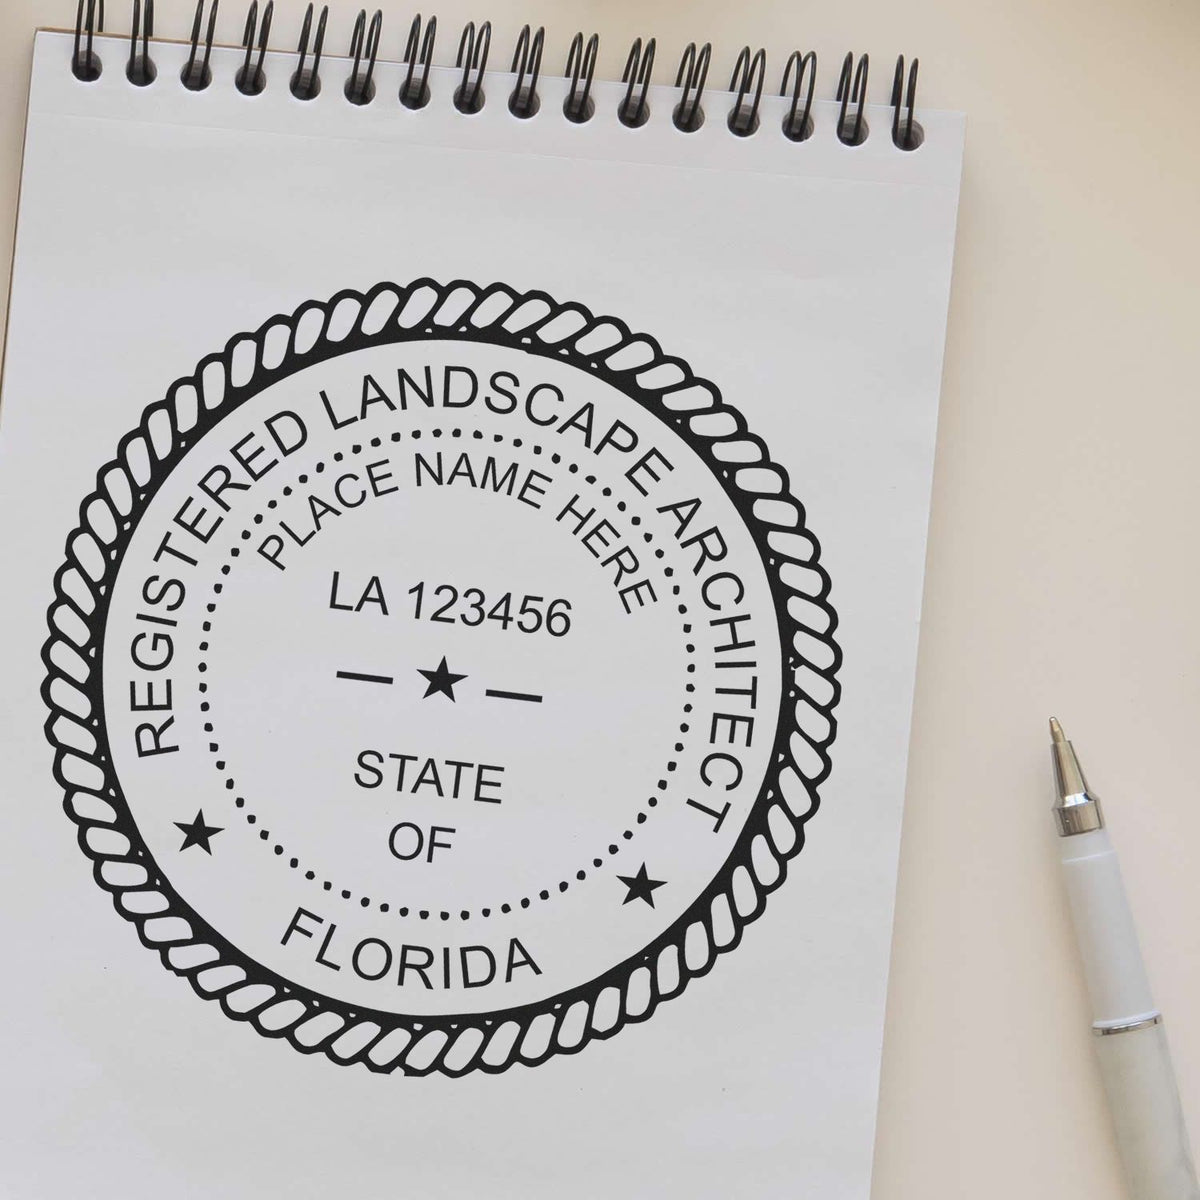 A lifestyle photo showing a stamped image of the Florida Landscape Architectural Seal Stamp on a piece of paper